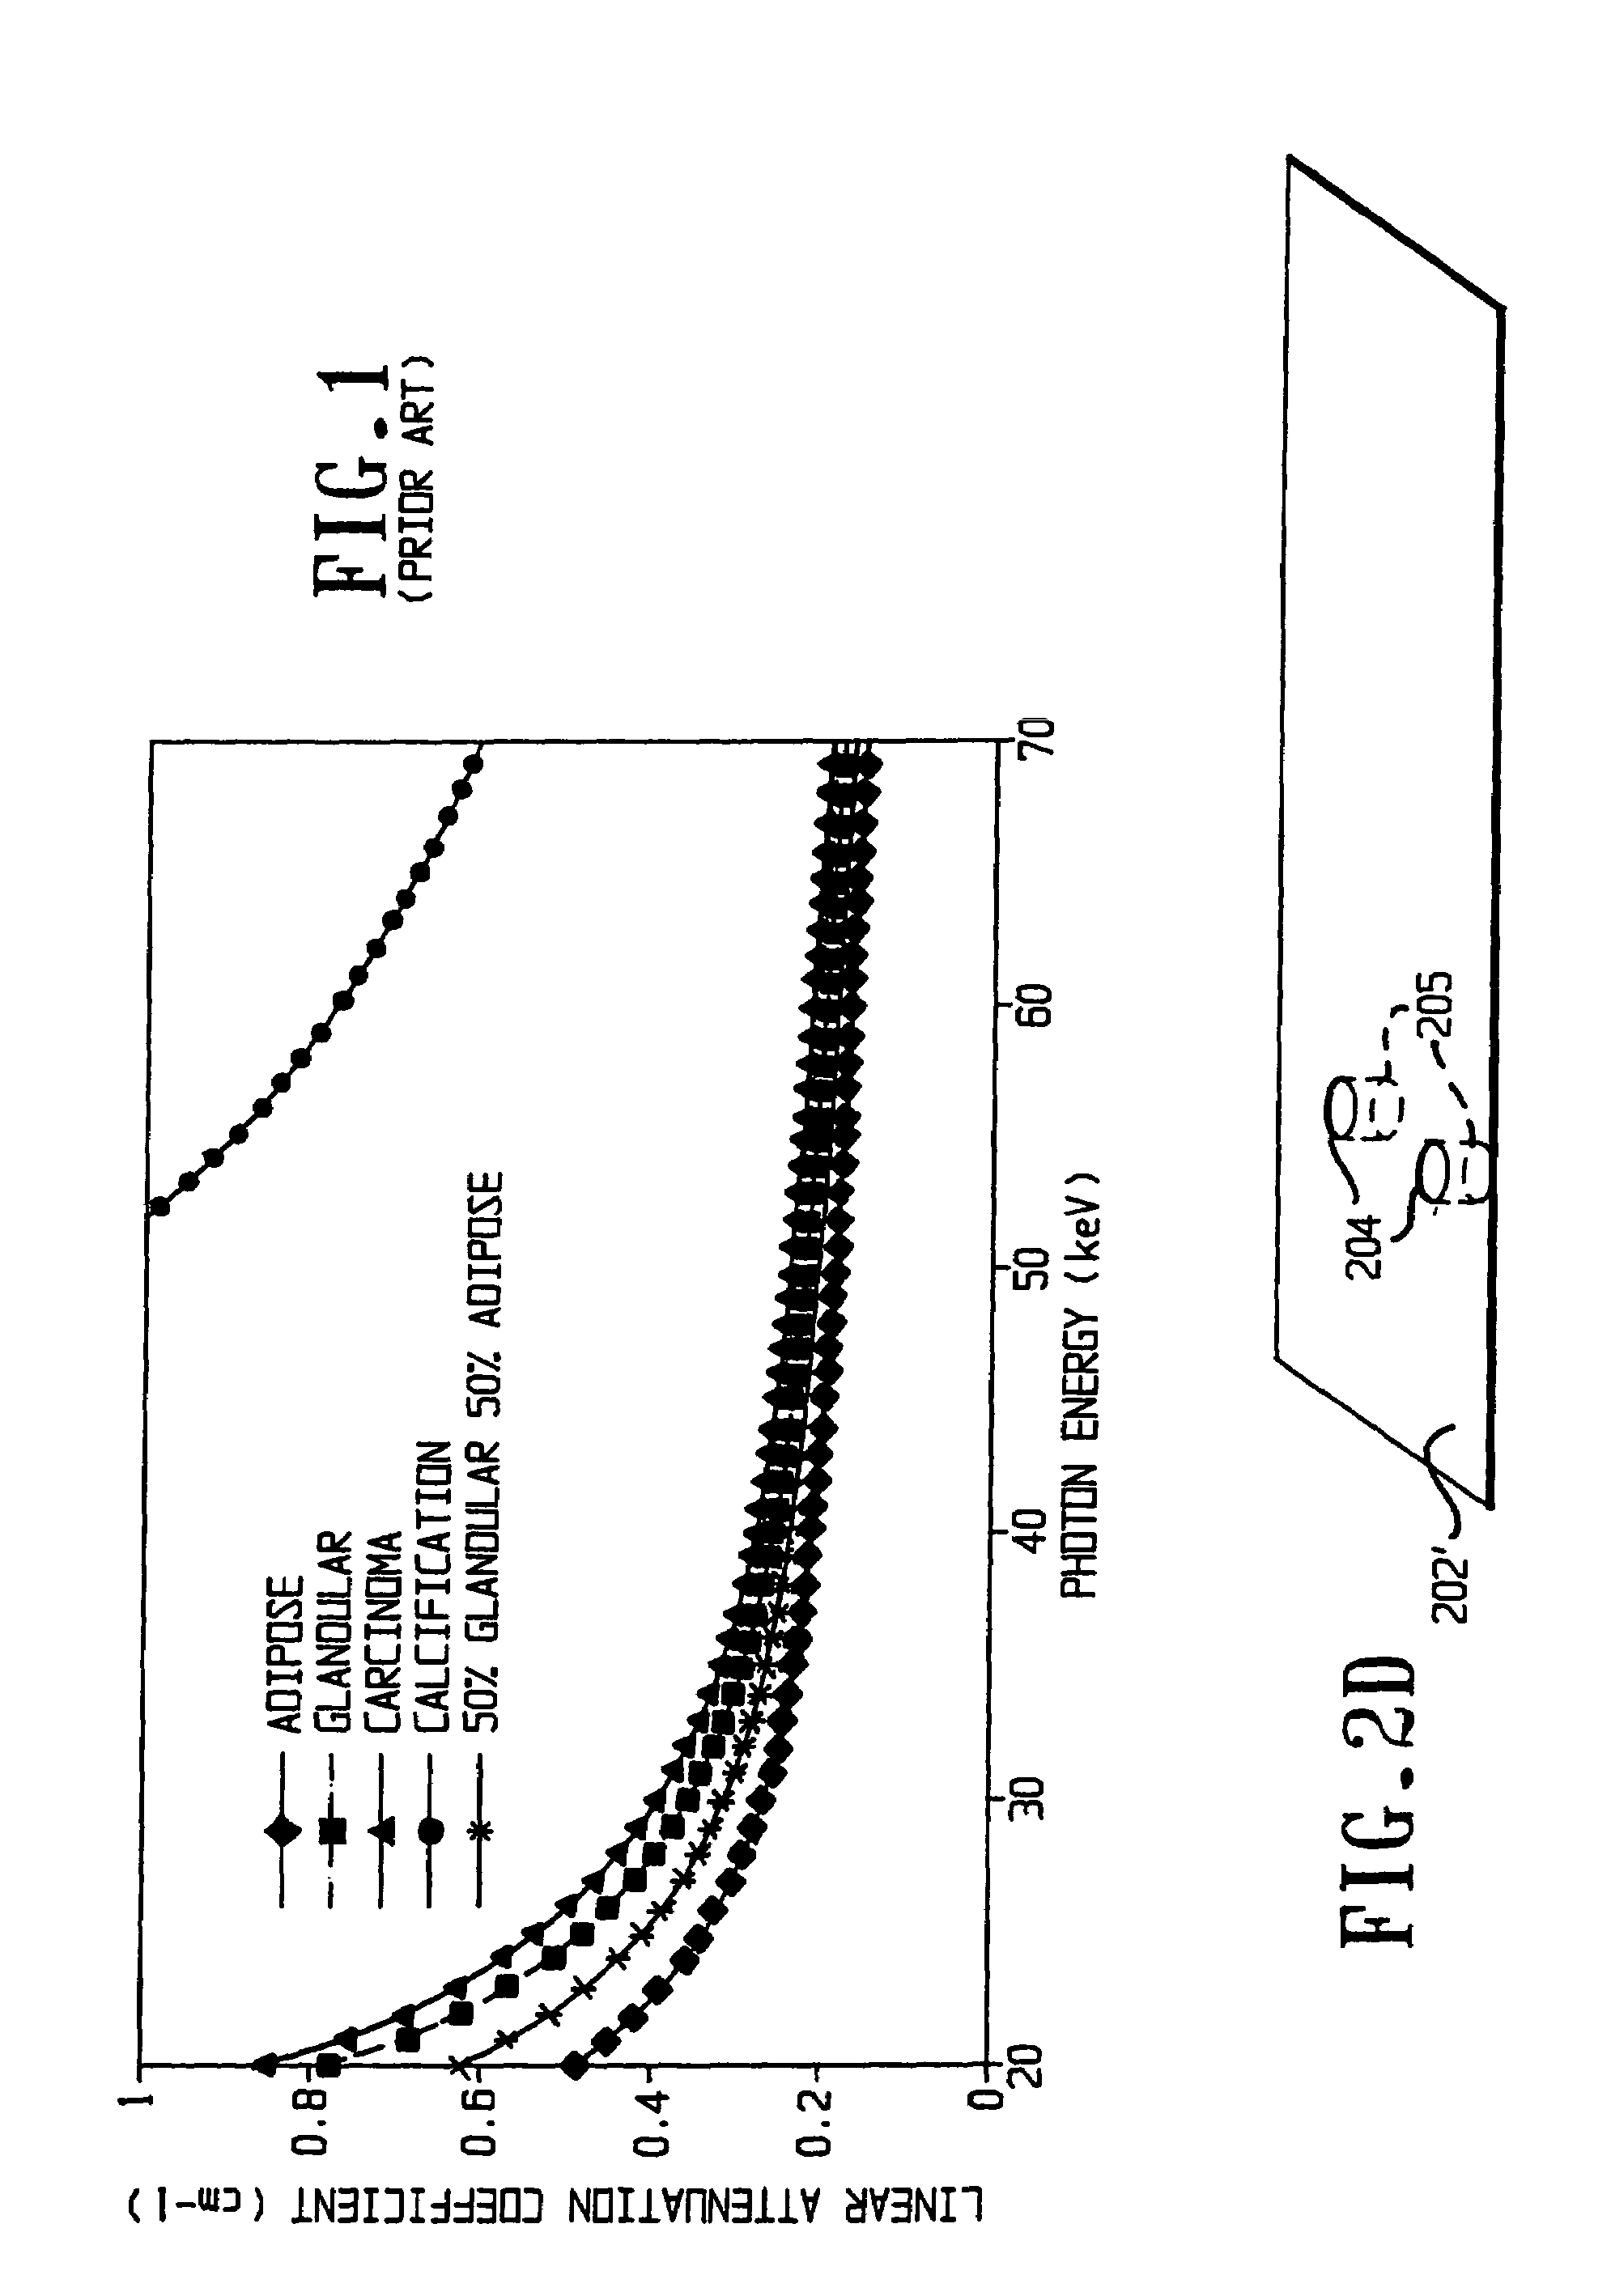 Apparatus and method for cone beam volume computed tomography breast imaging